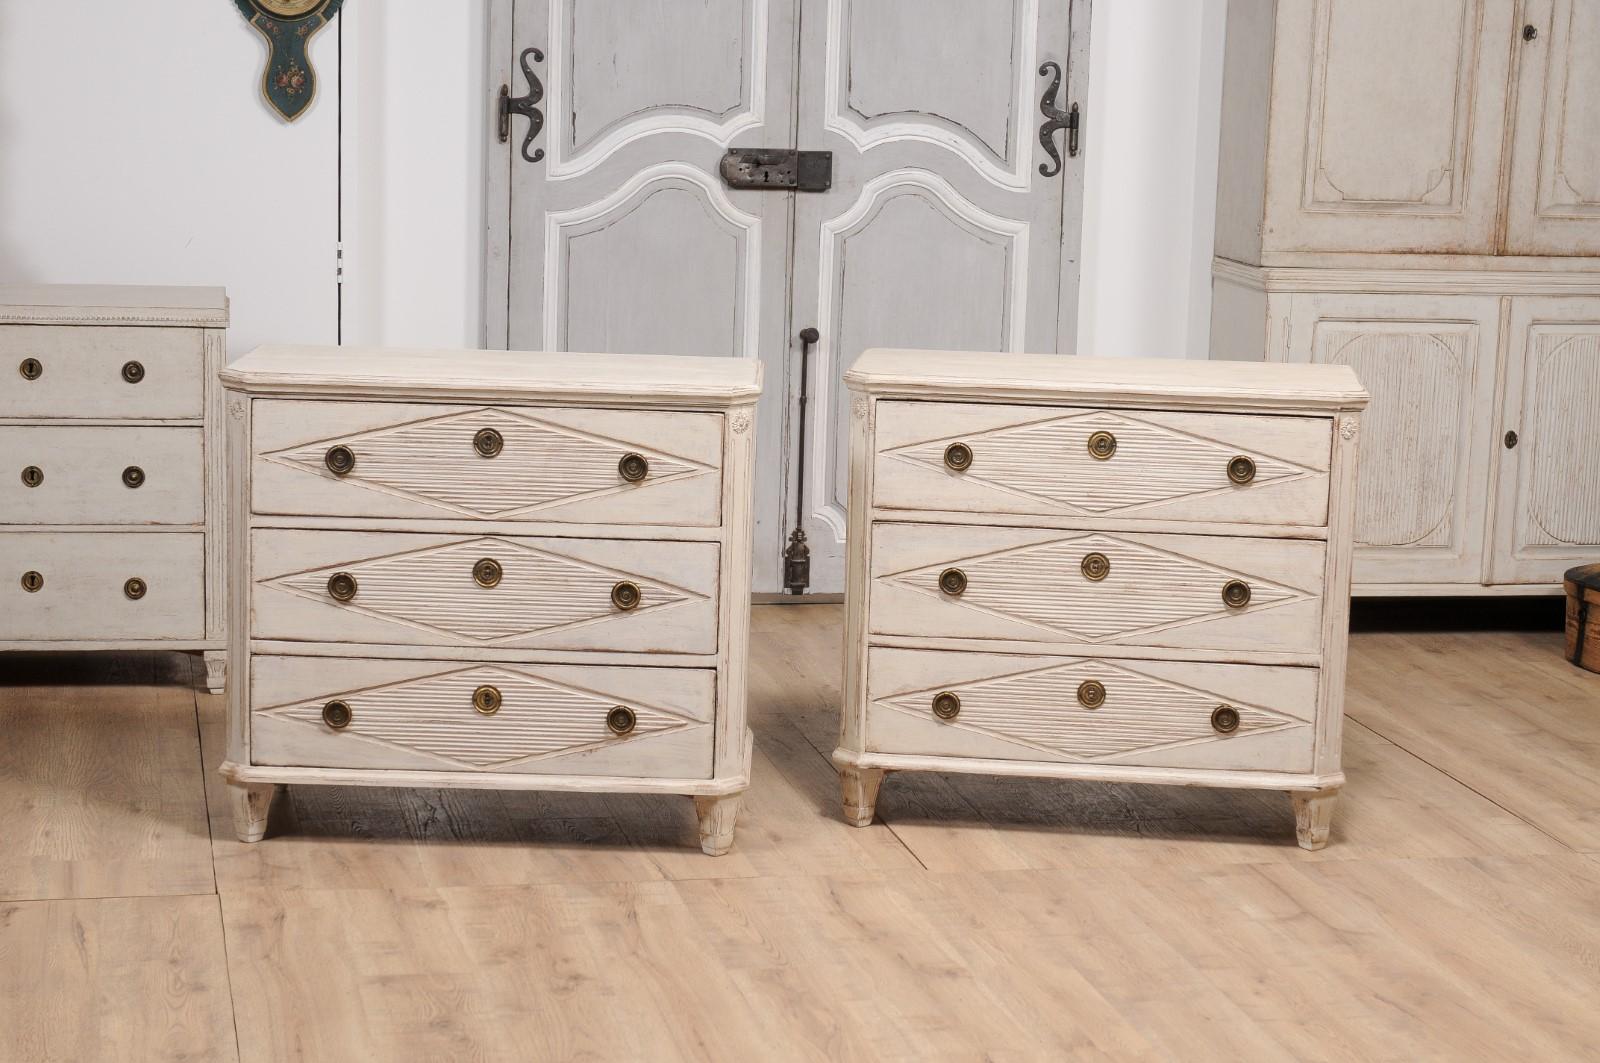 Gustavian Style 19th Century Painted Chests with Carved Diamond Motifs, a Pair For Sale 7